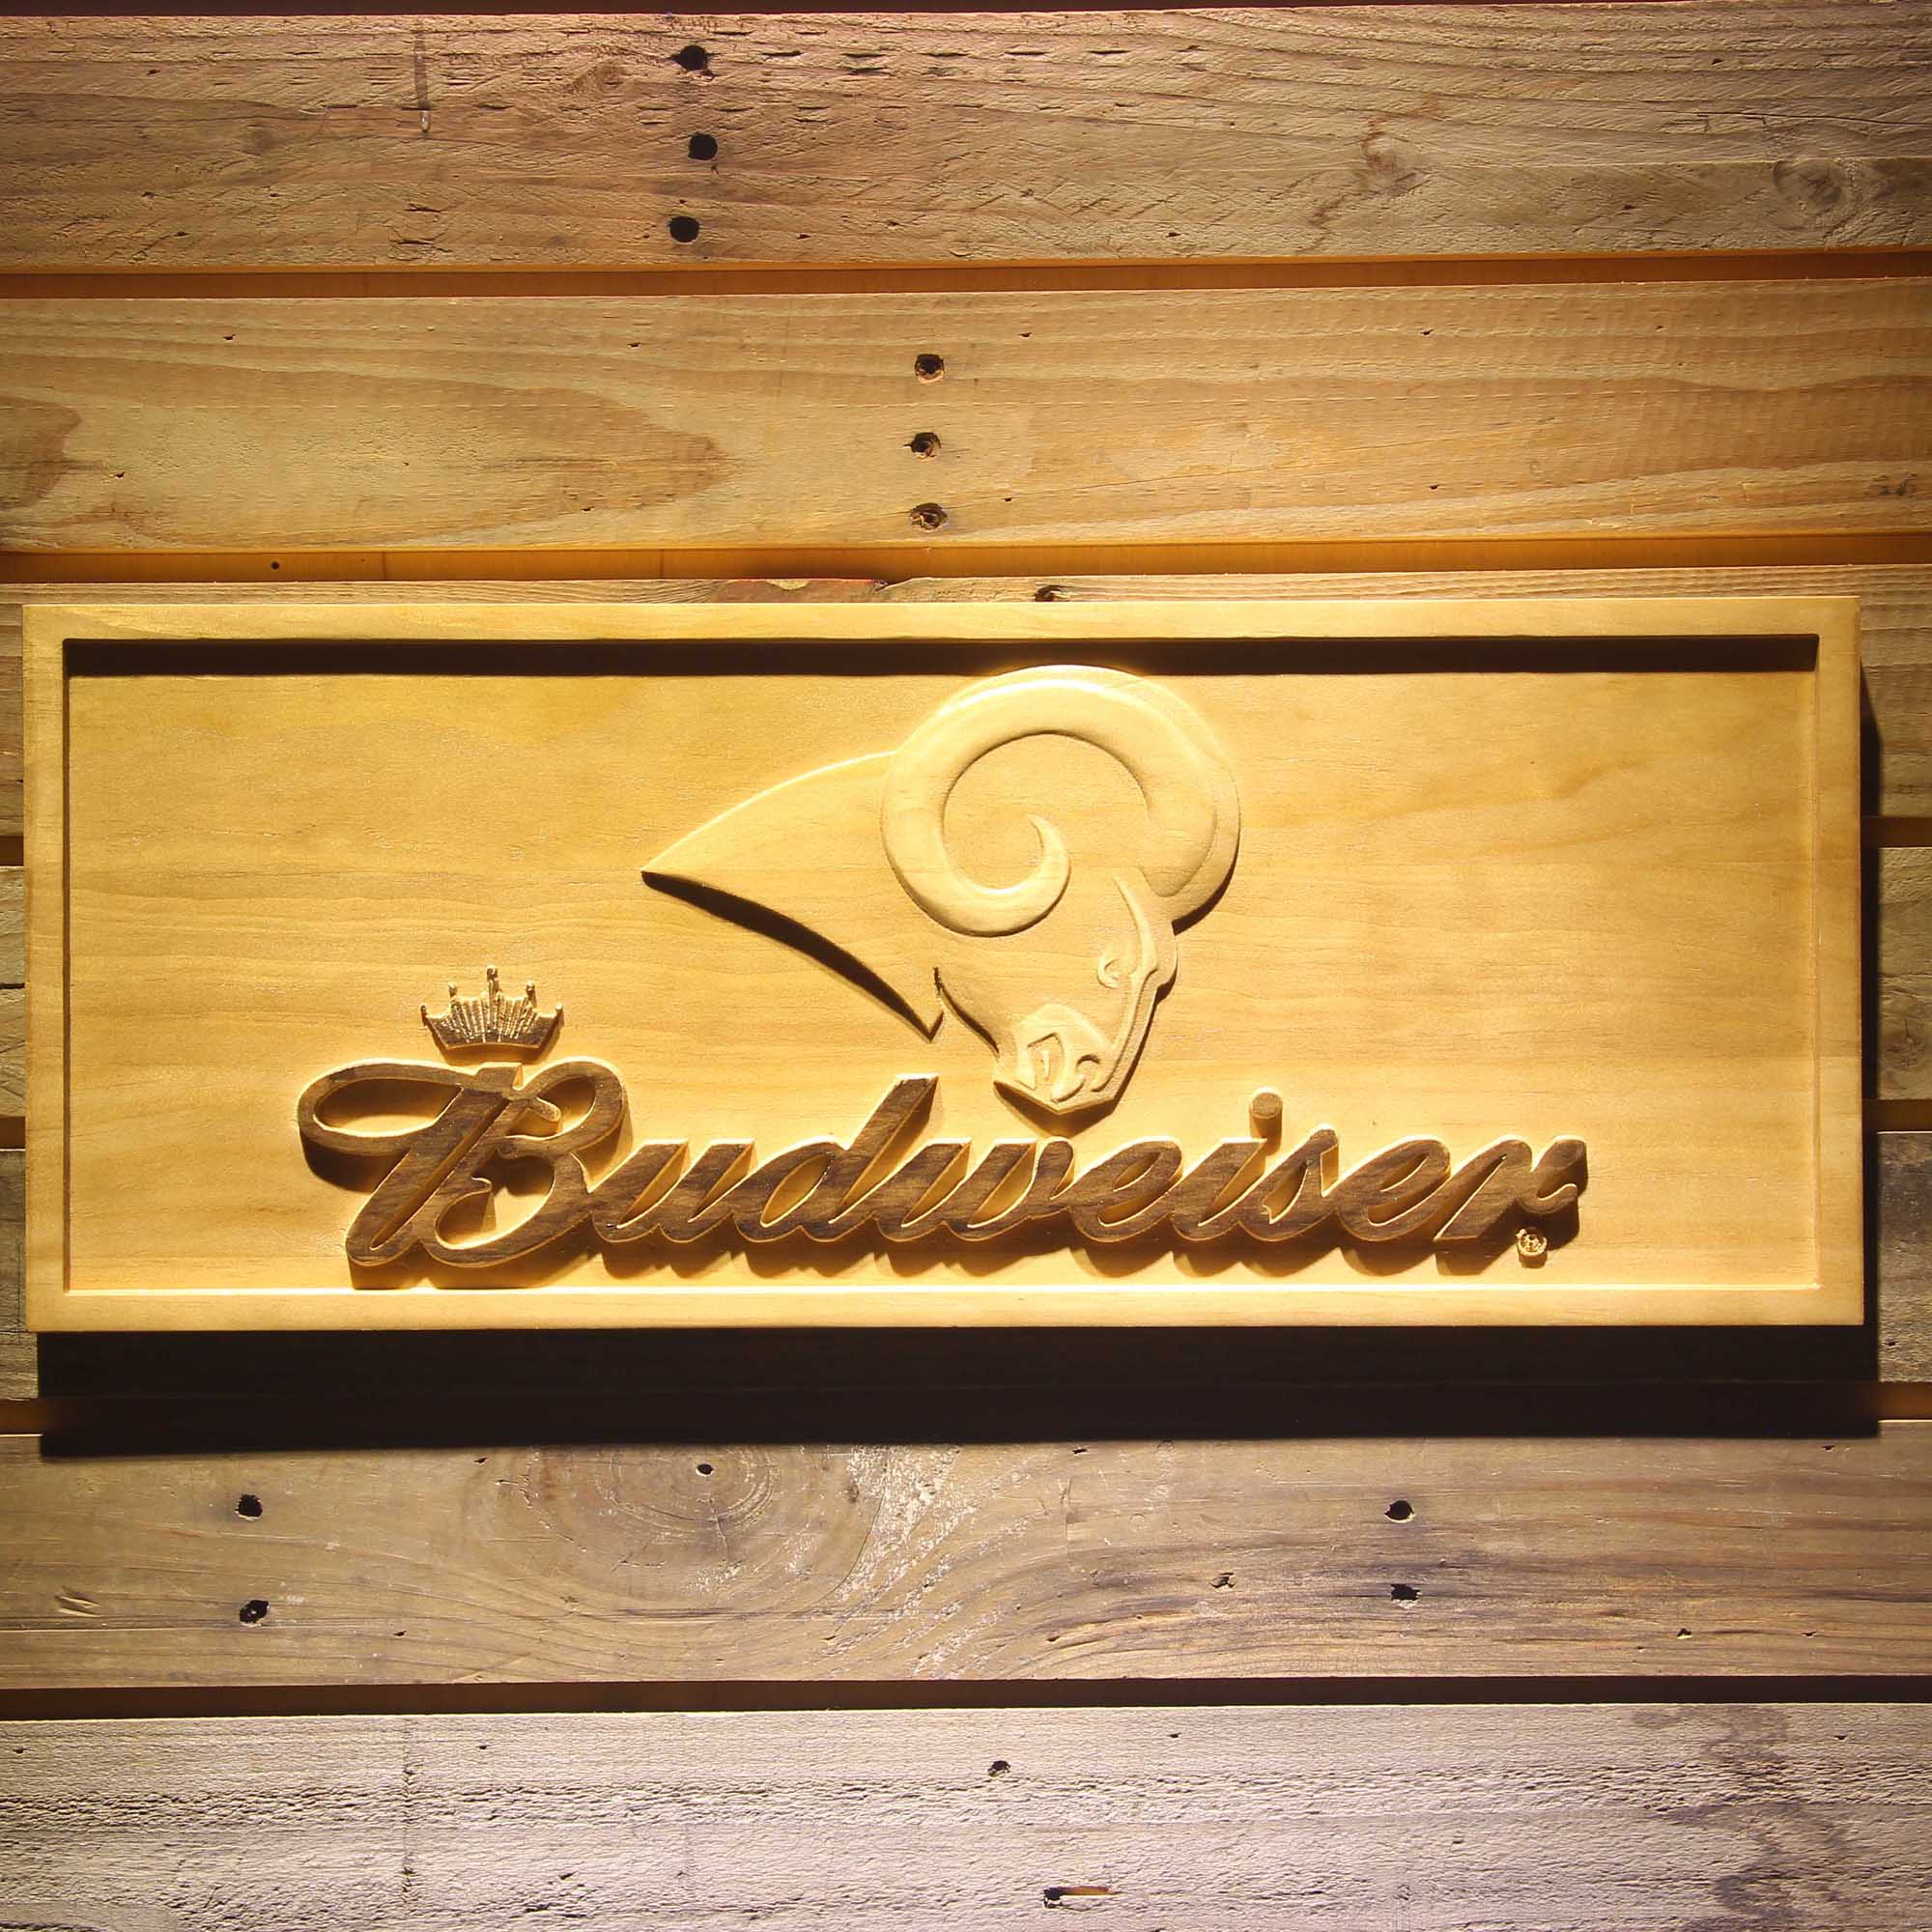 Los Angeles Rams Budweiser 3D Wooden Engrave Sign